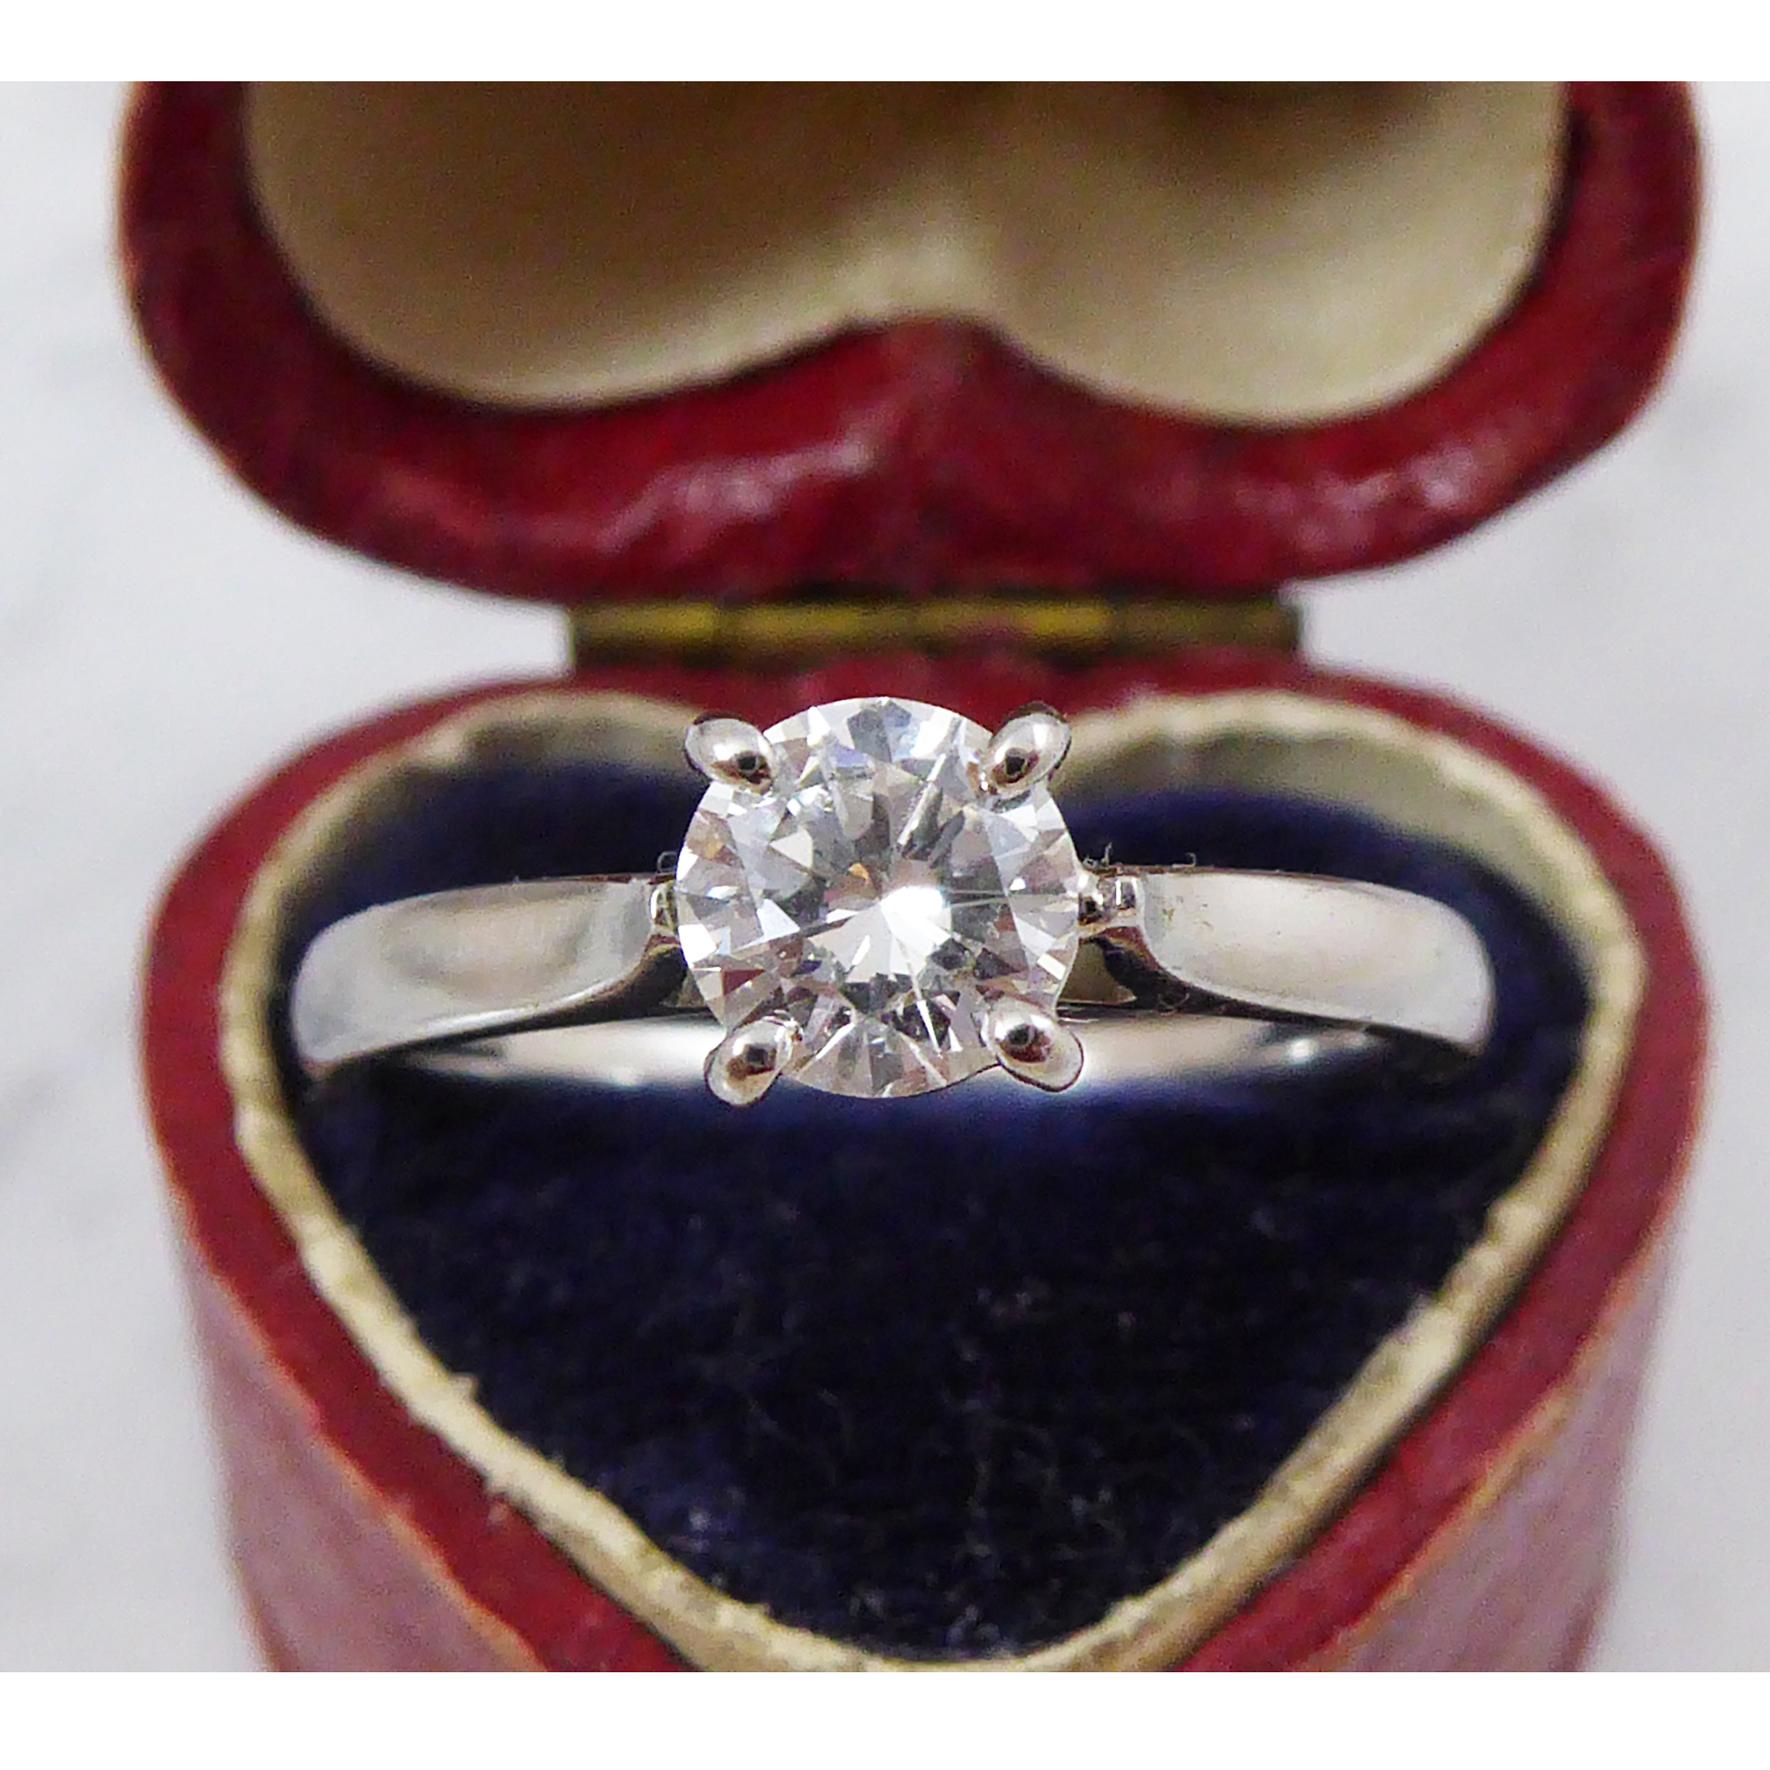 Fabulous single stone engagment ring sporting a round brilliant cut diamond, 0.52ct and with colour and clarity assessed as E/F and VS2 respectively.  

Measuring approx. 5.14mm diameter, the diamonds is four claw set to a basket mount, with